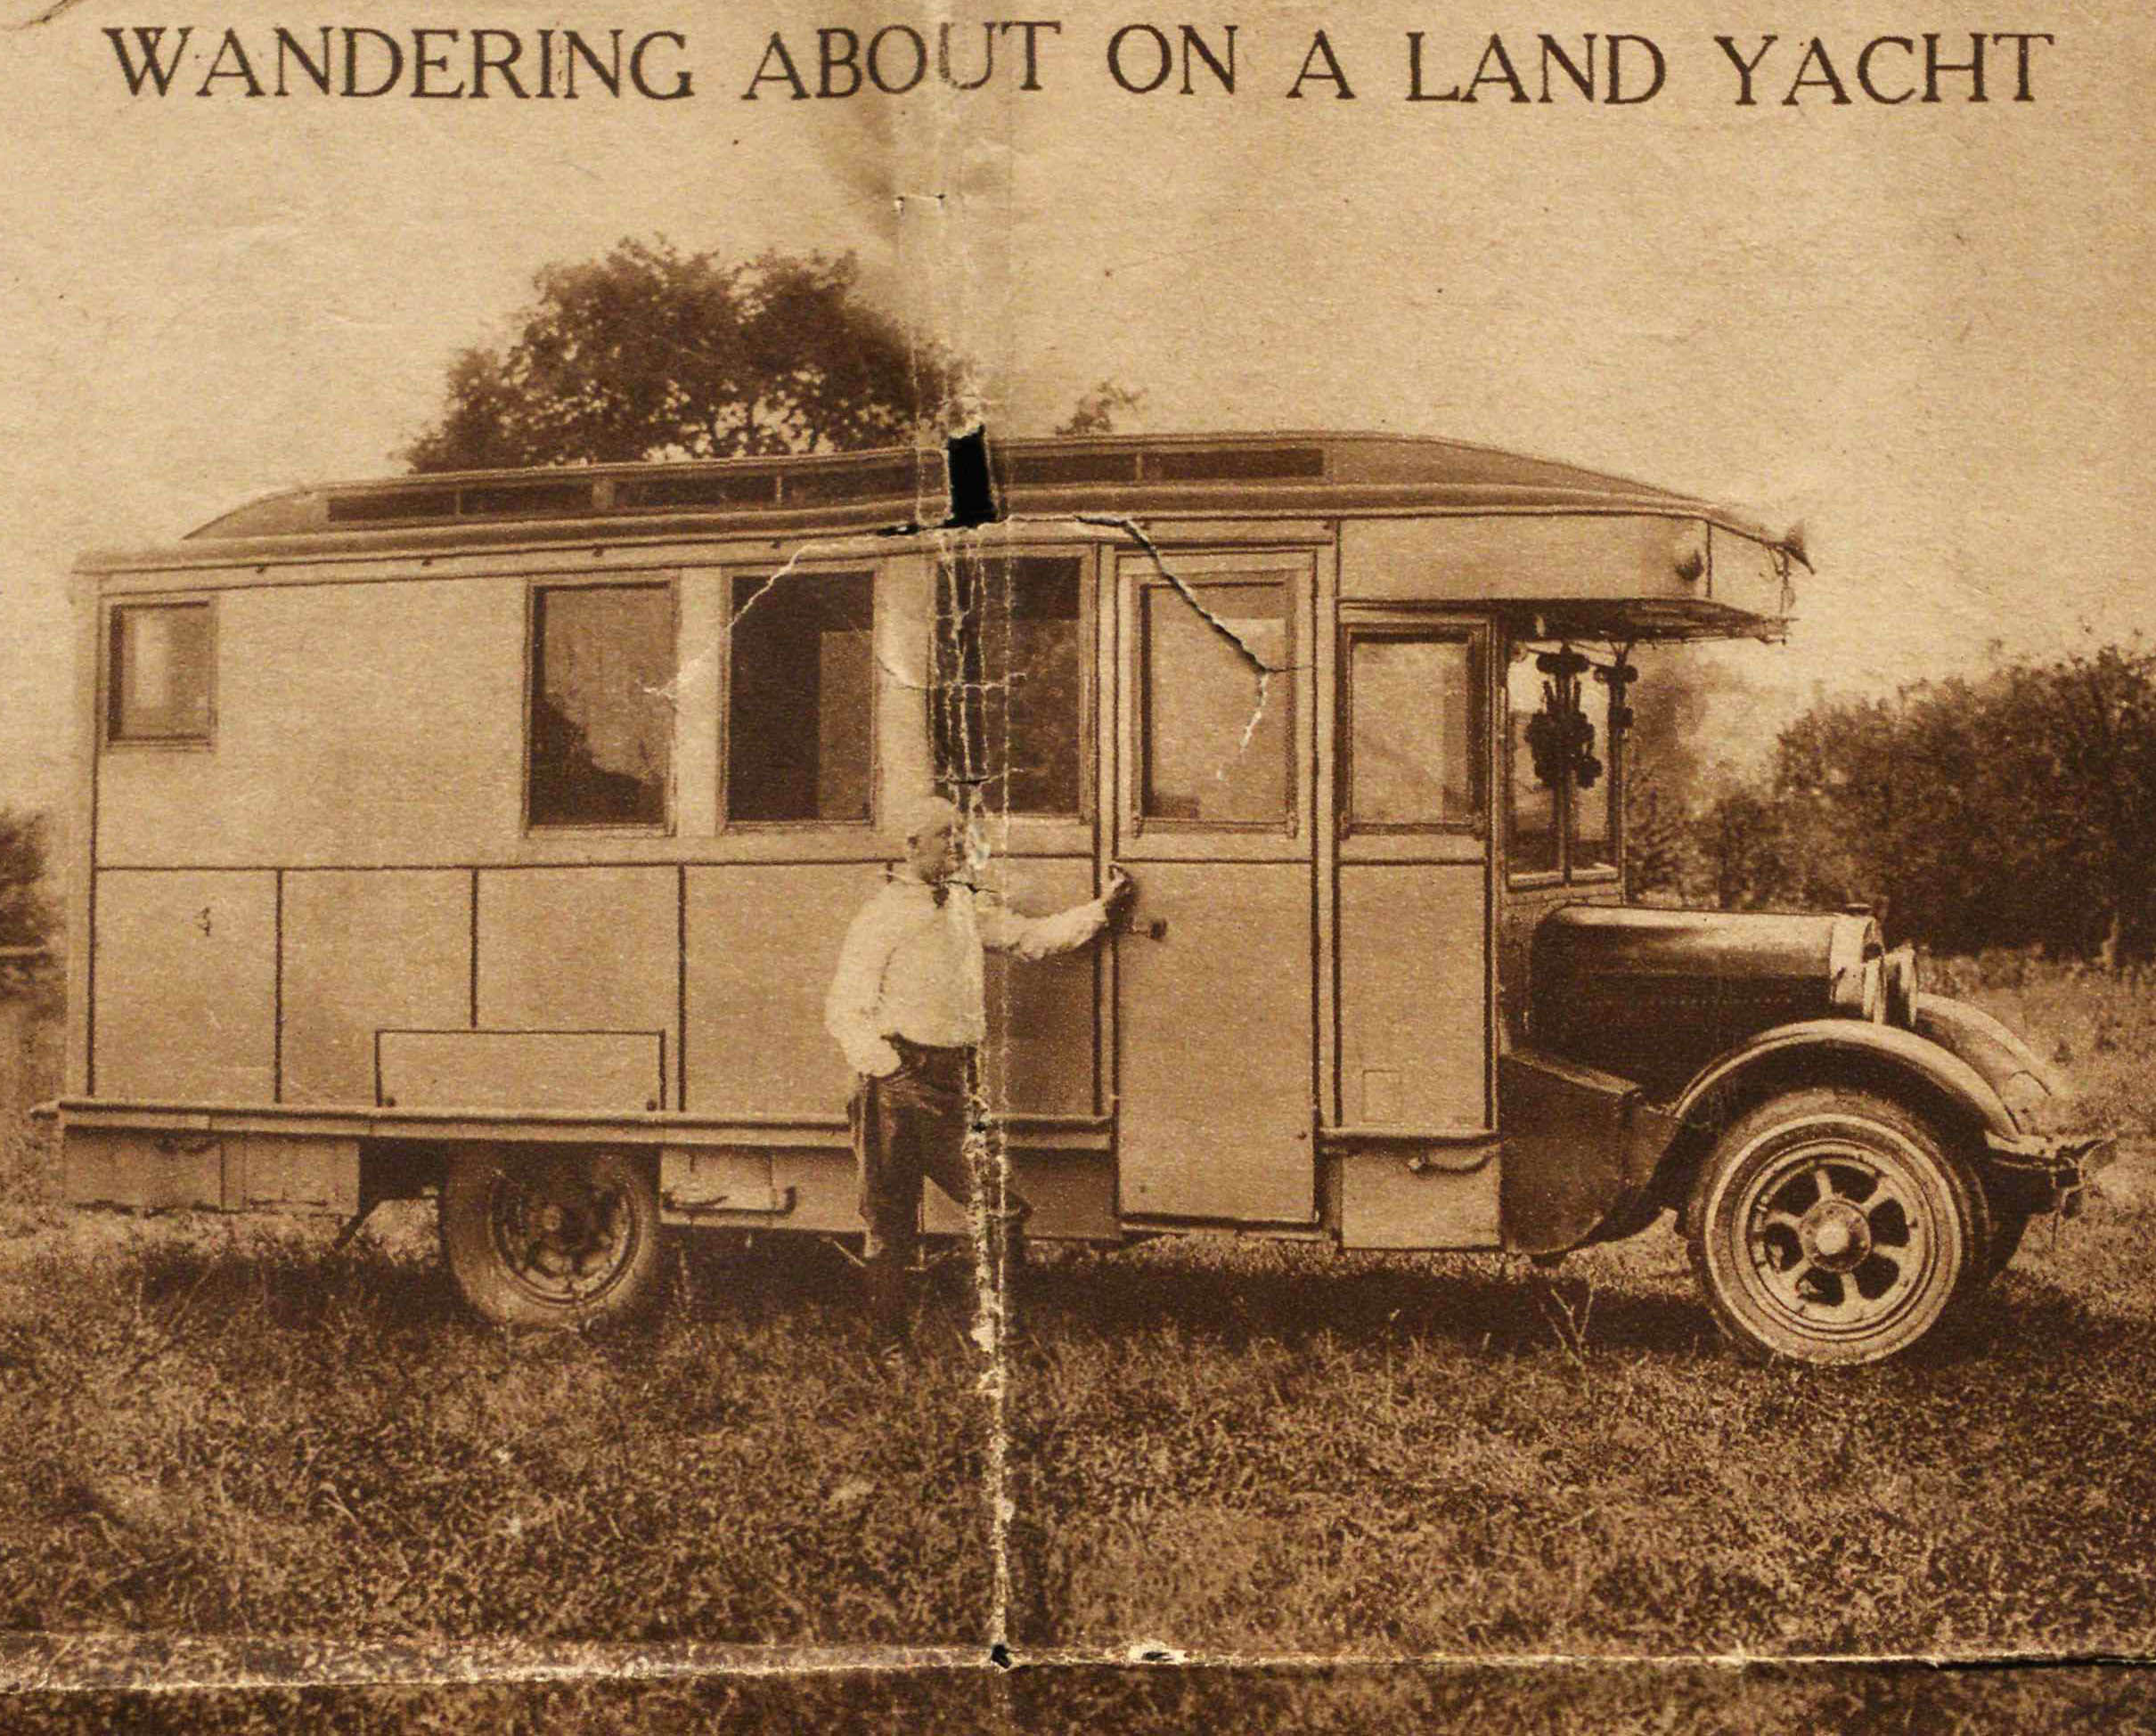 "Wandering About On A Land Yacht"